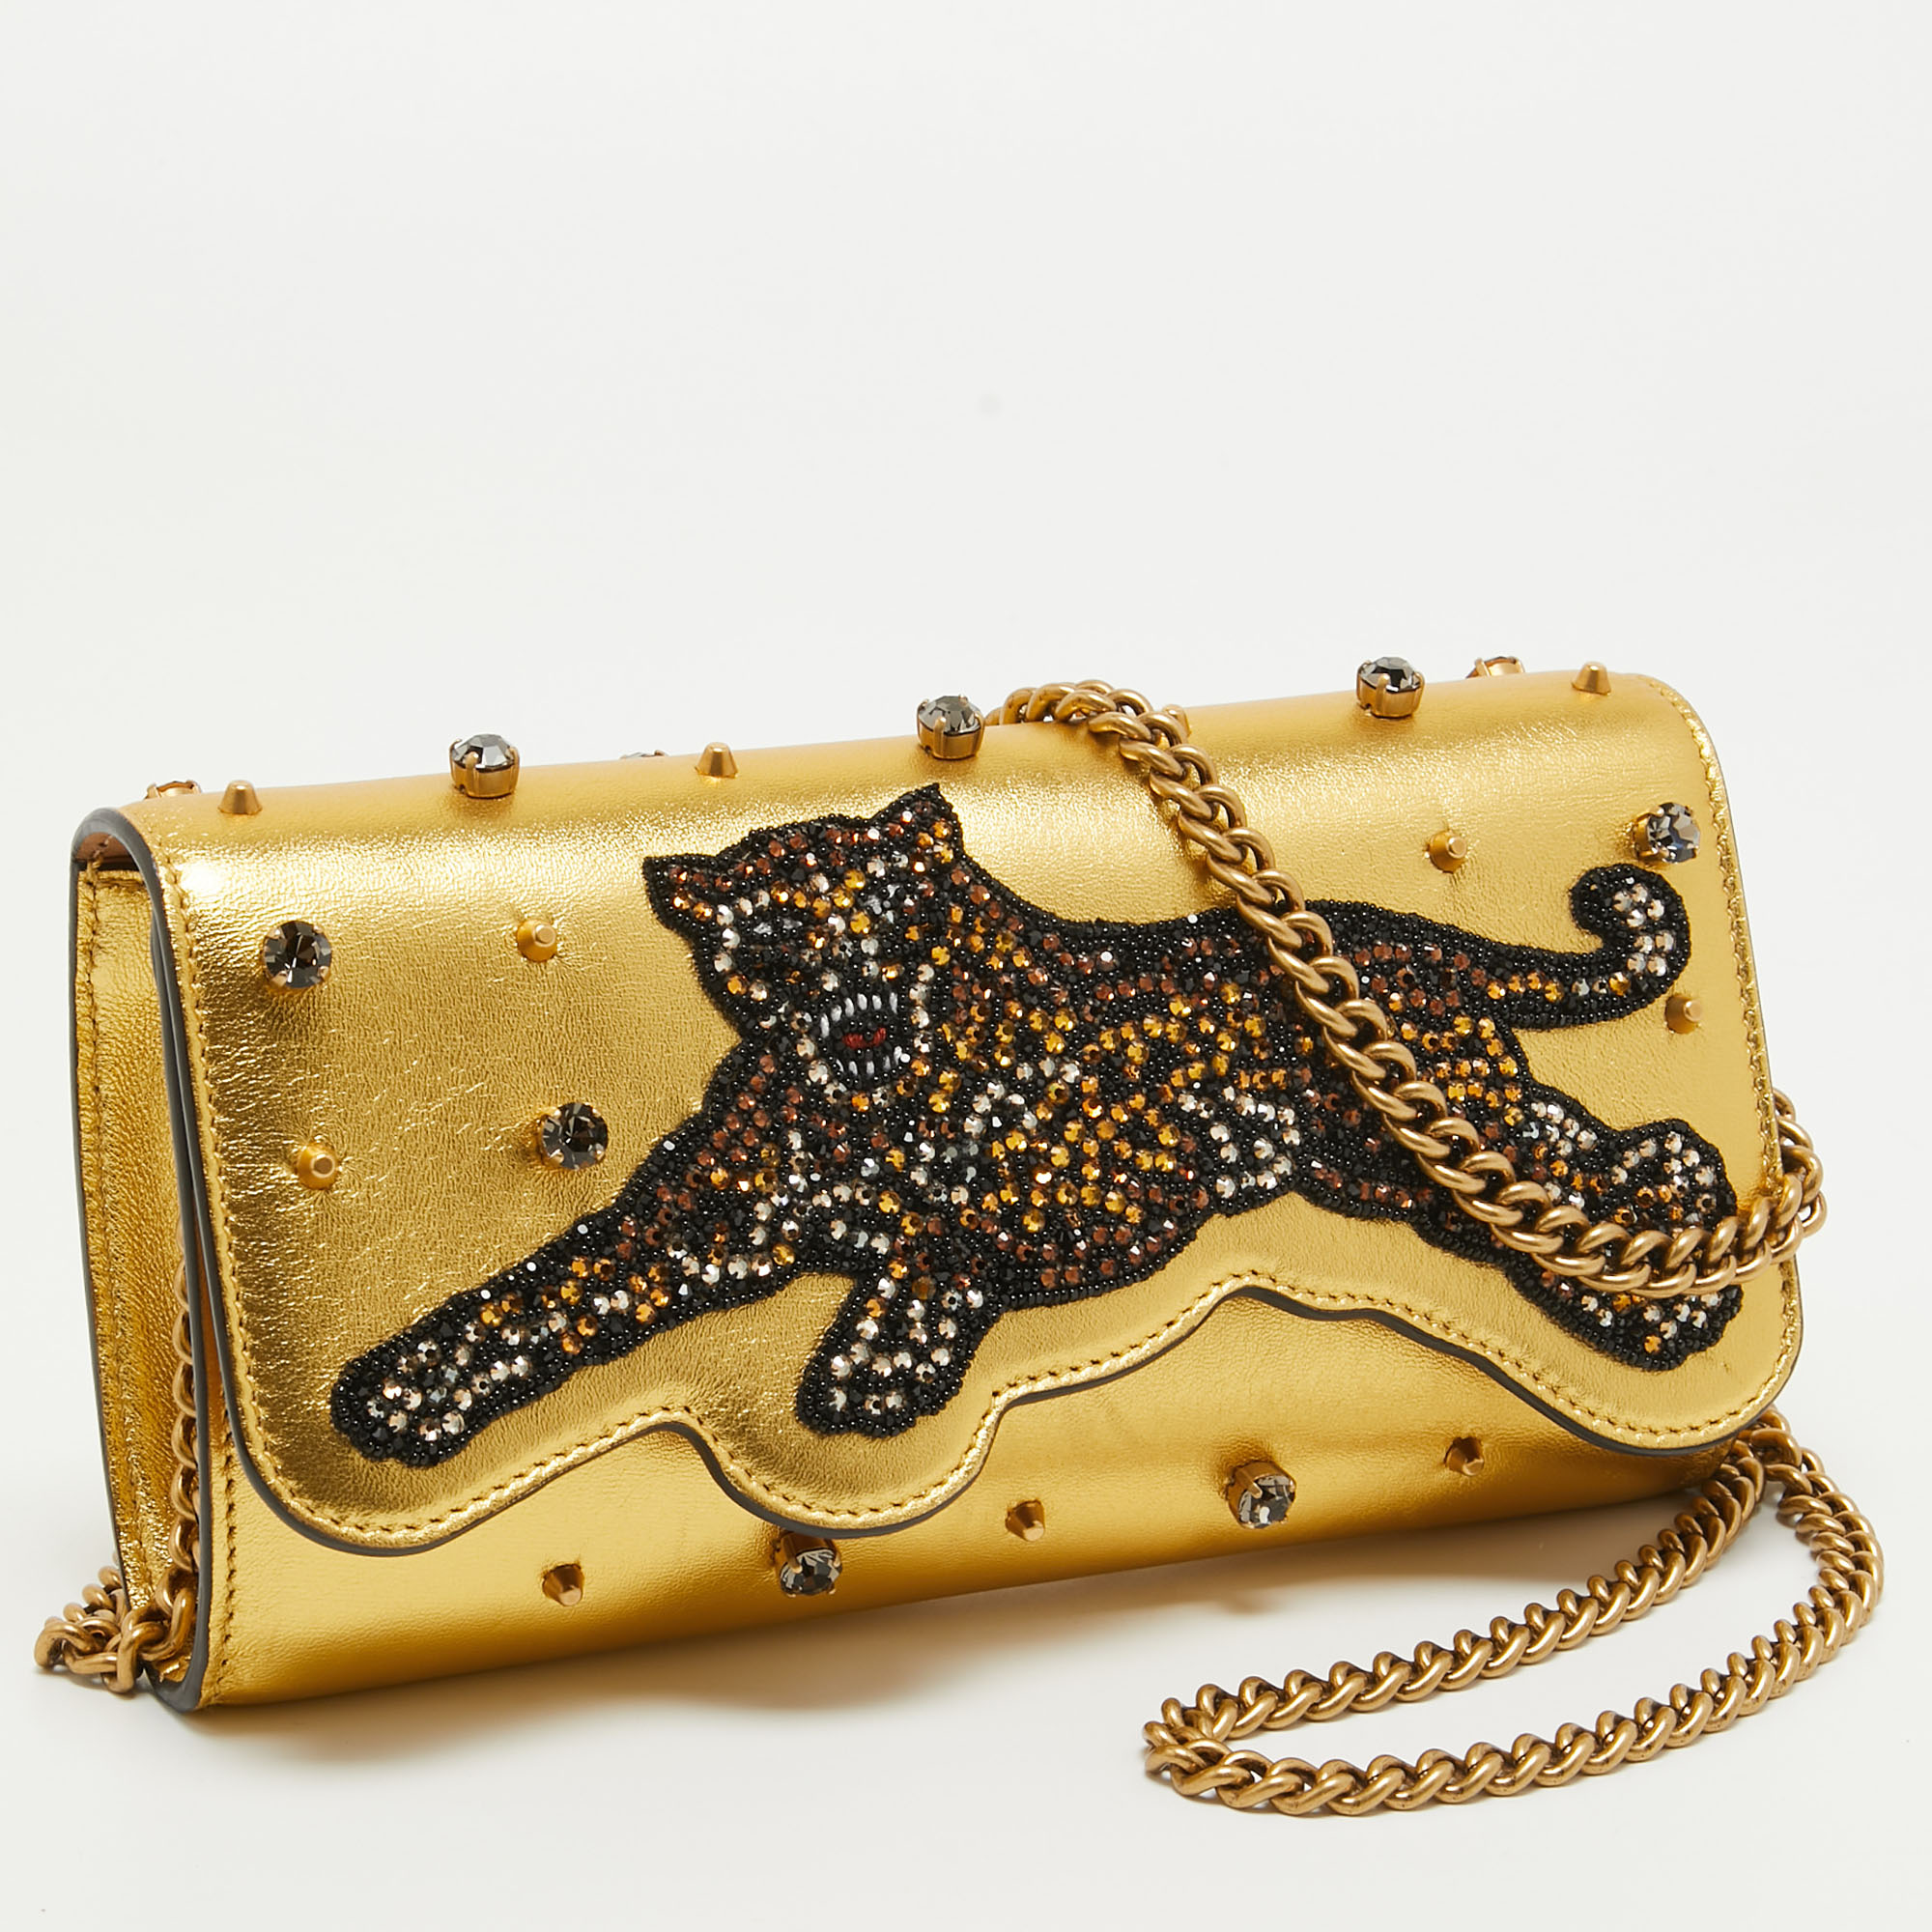 Gucci Gold Leather Embroidered Tiger Crystal Studded Chain Clutch